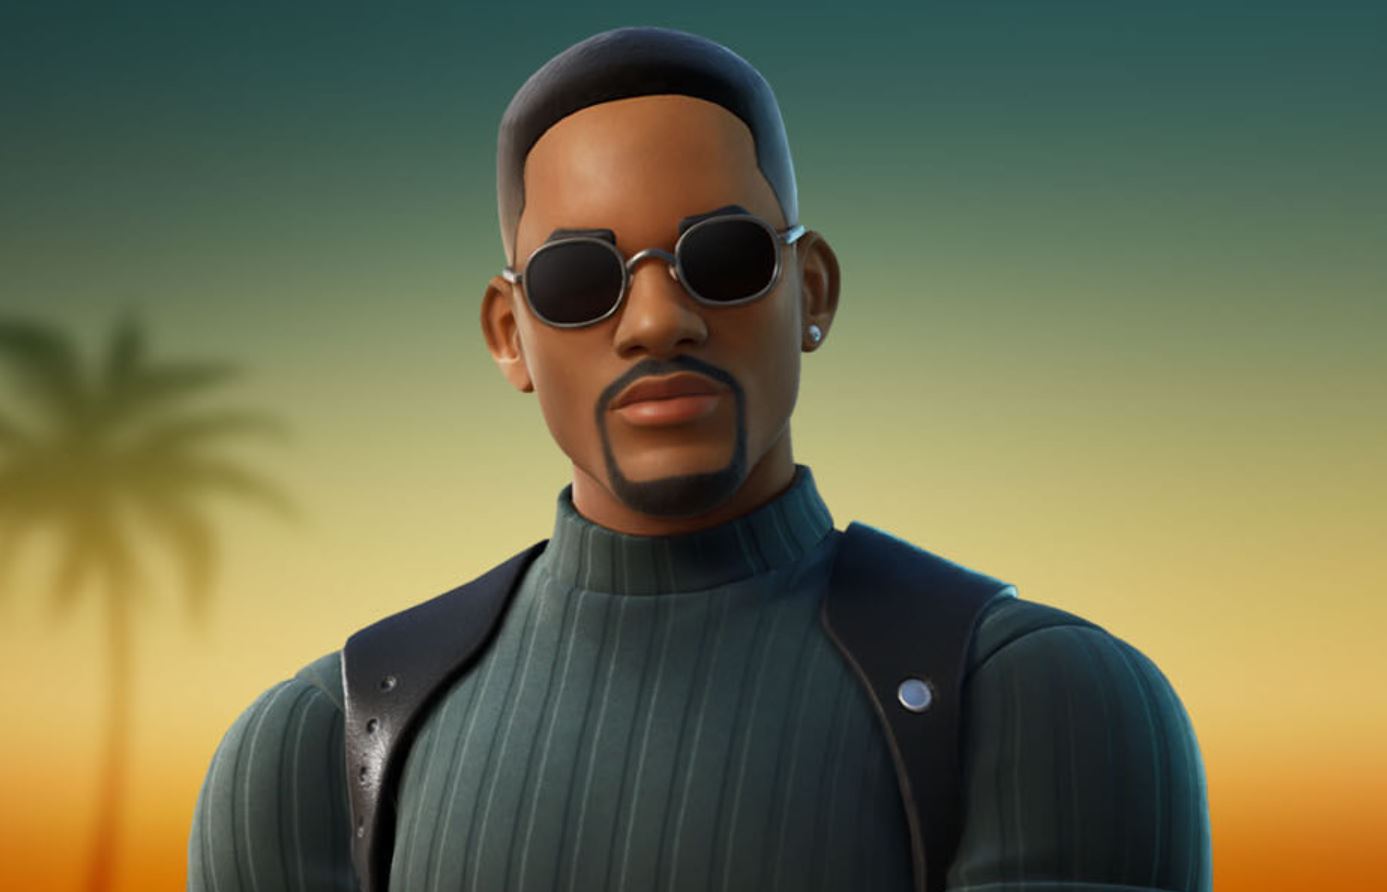 fortnite adds will smith's character